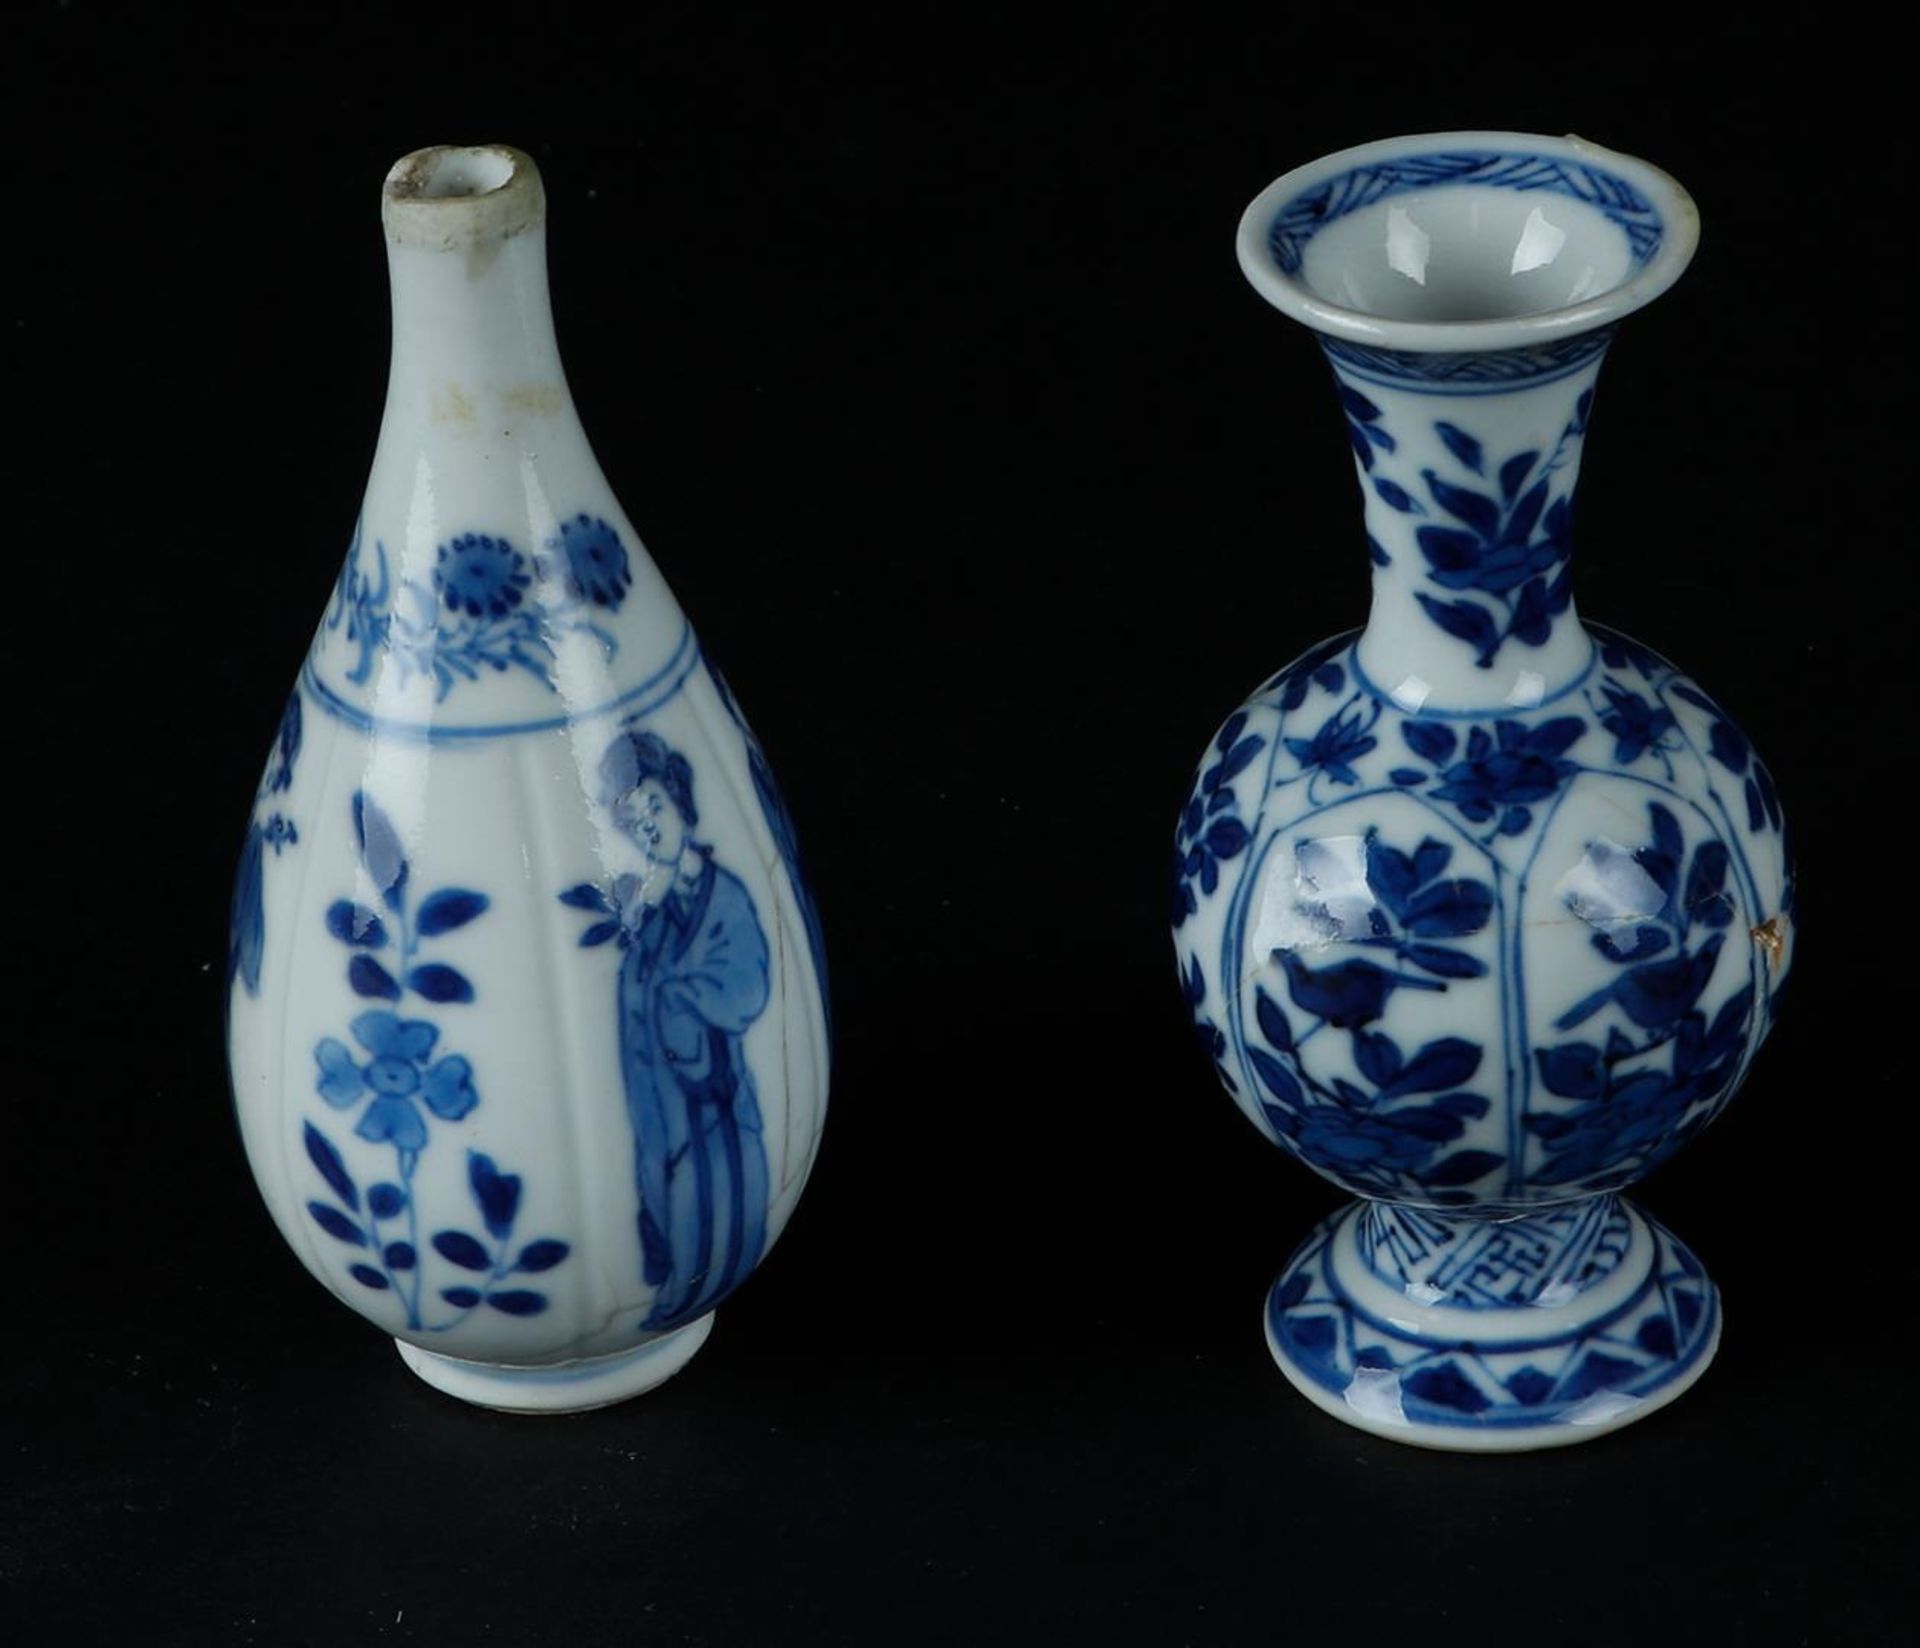 A porcelain ribbed vase with lily decoration on the belly & a belly vase with floral decor in lotus  - Image 2 of 3